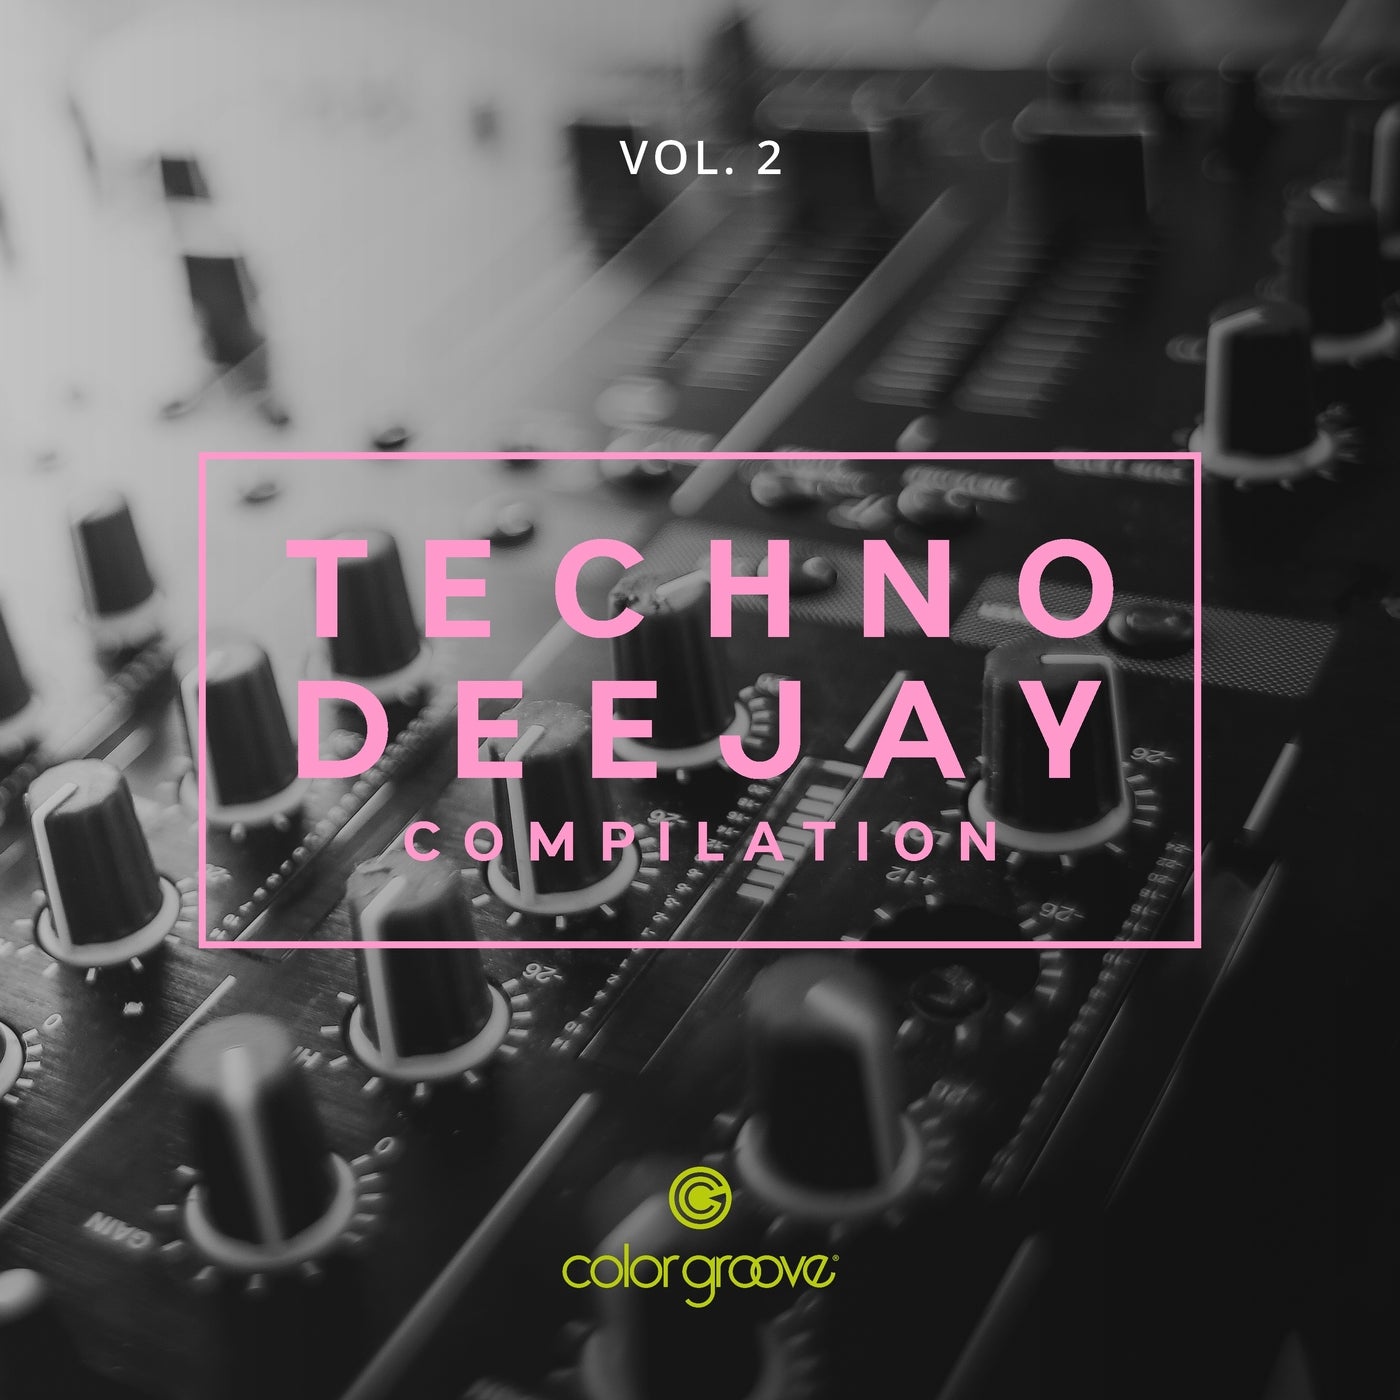 Alex Patane', Canosa - Techno Deejay Compilation, Vol. 2 [Color Groove]